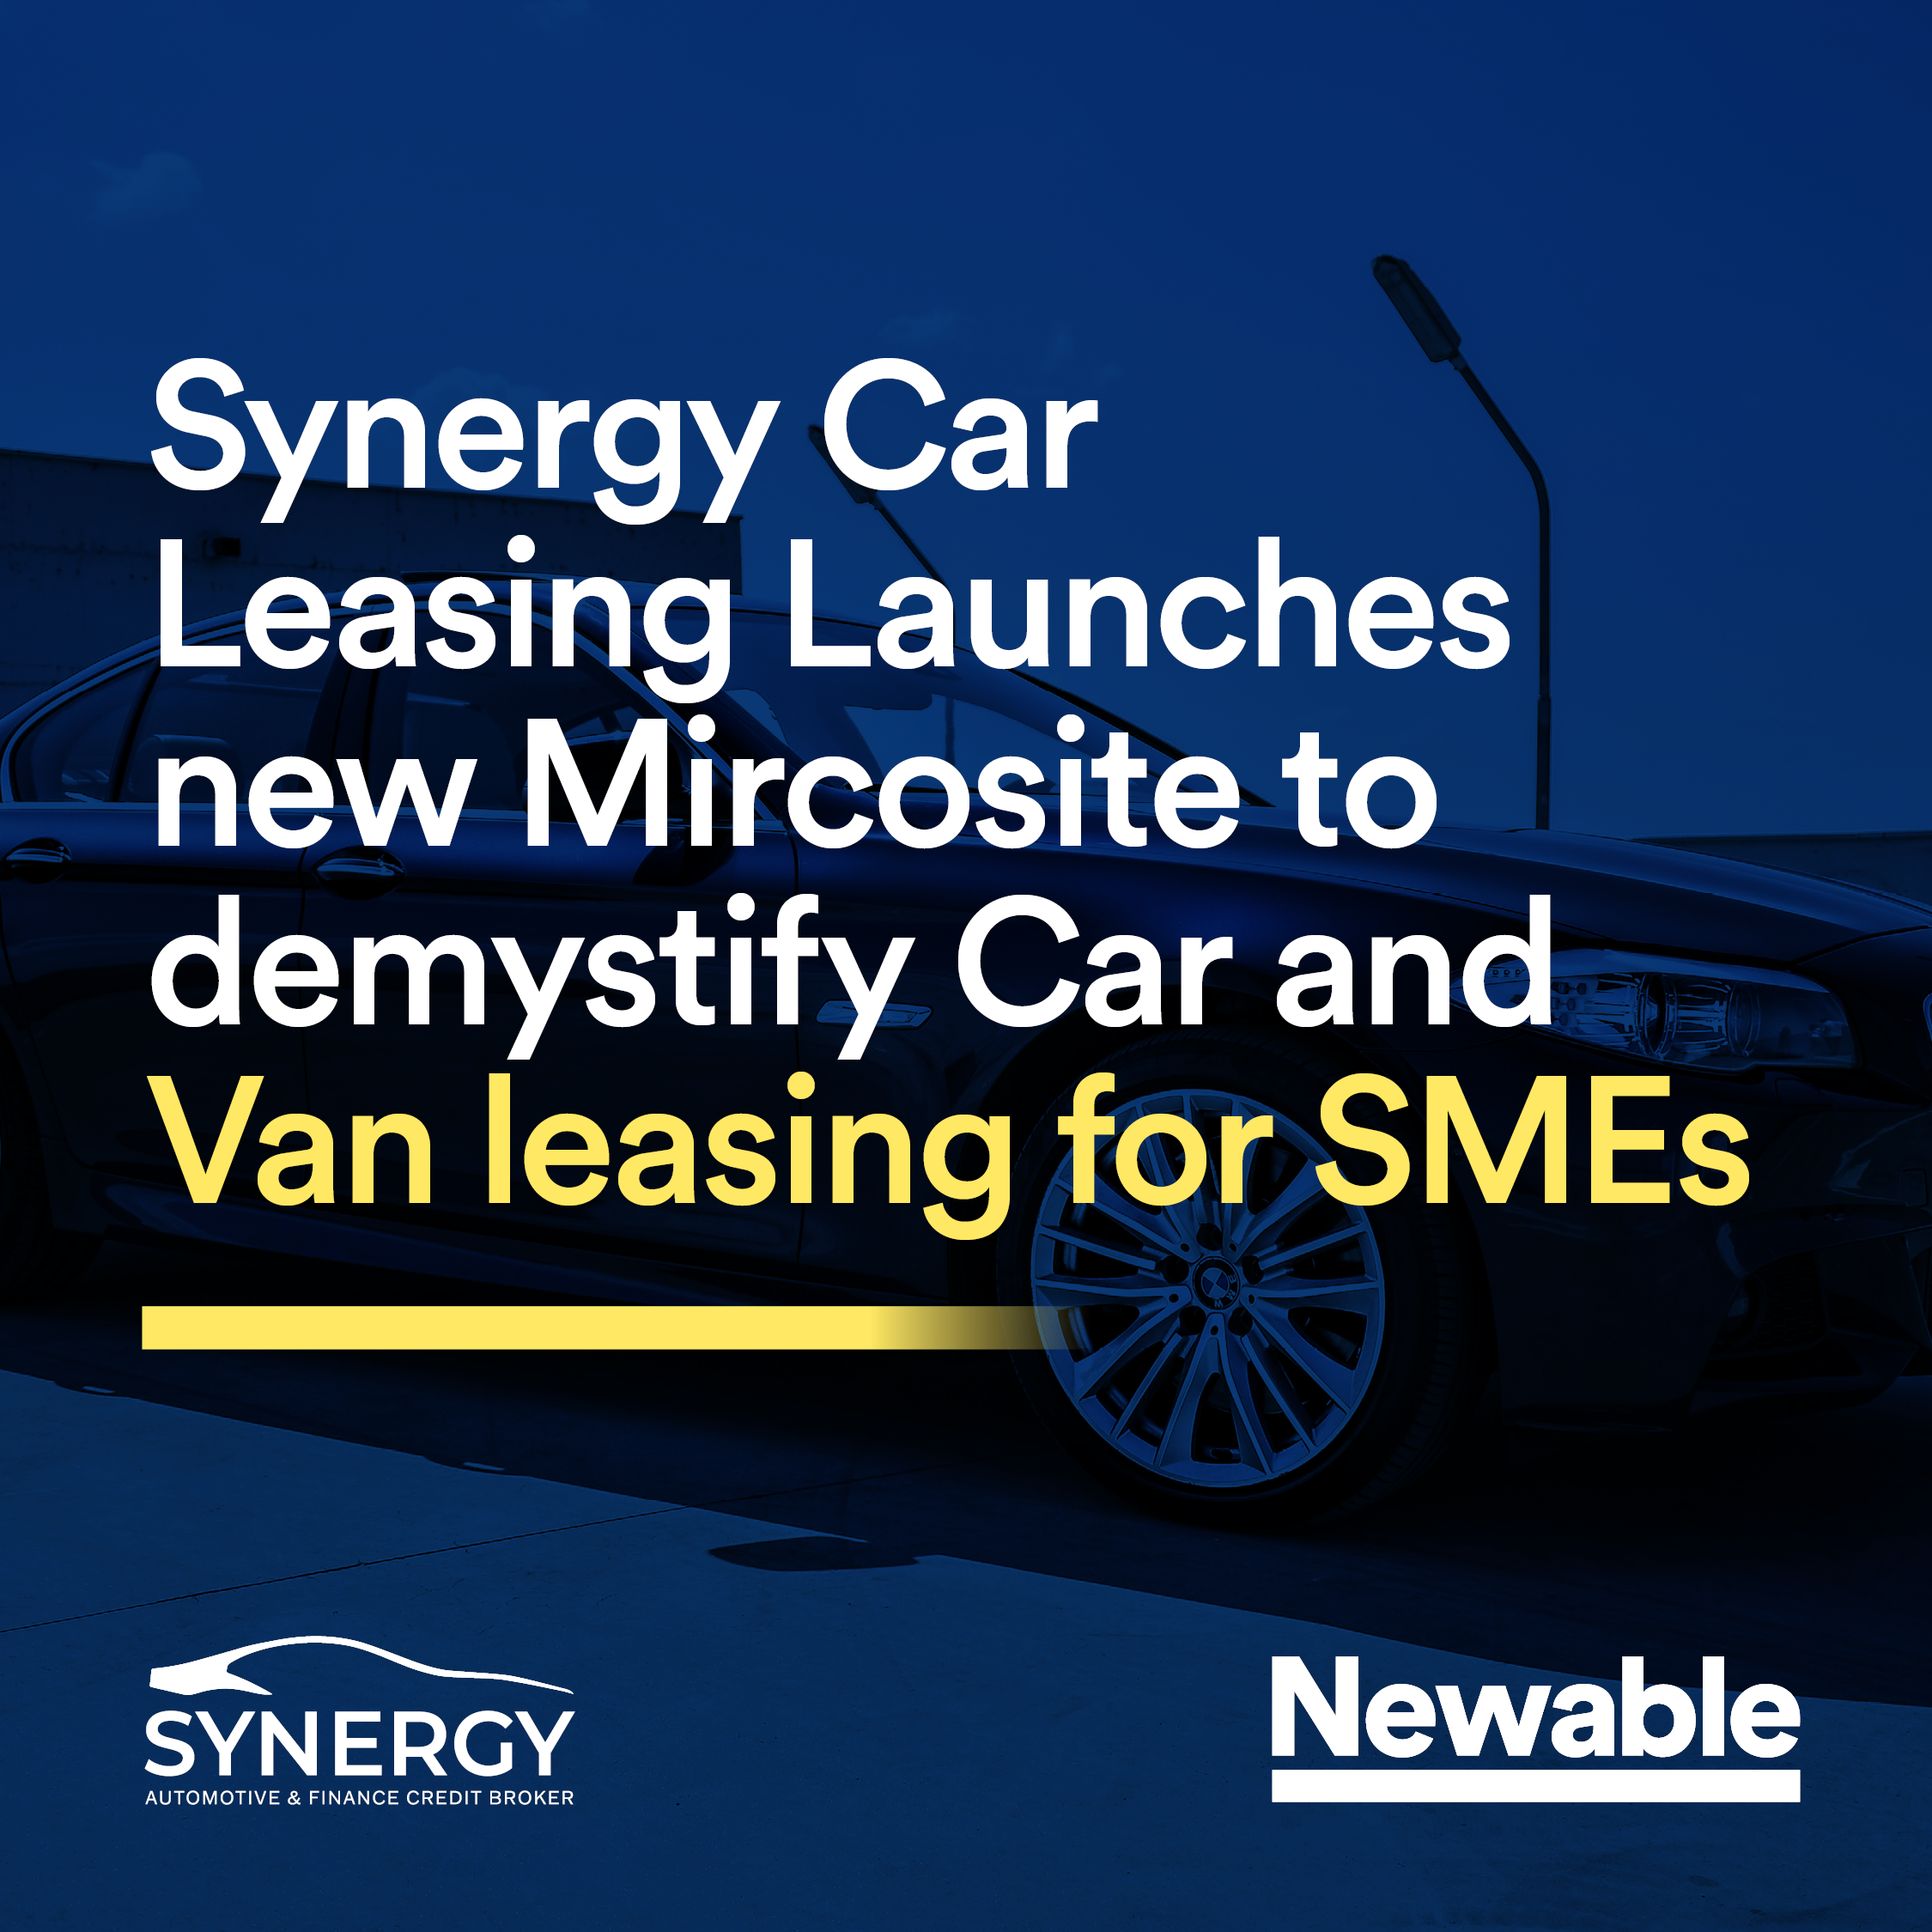 Synergy Car Leasing Launches new Leasing Guide to demystify Car and Van leasing for SMEs